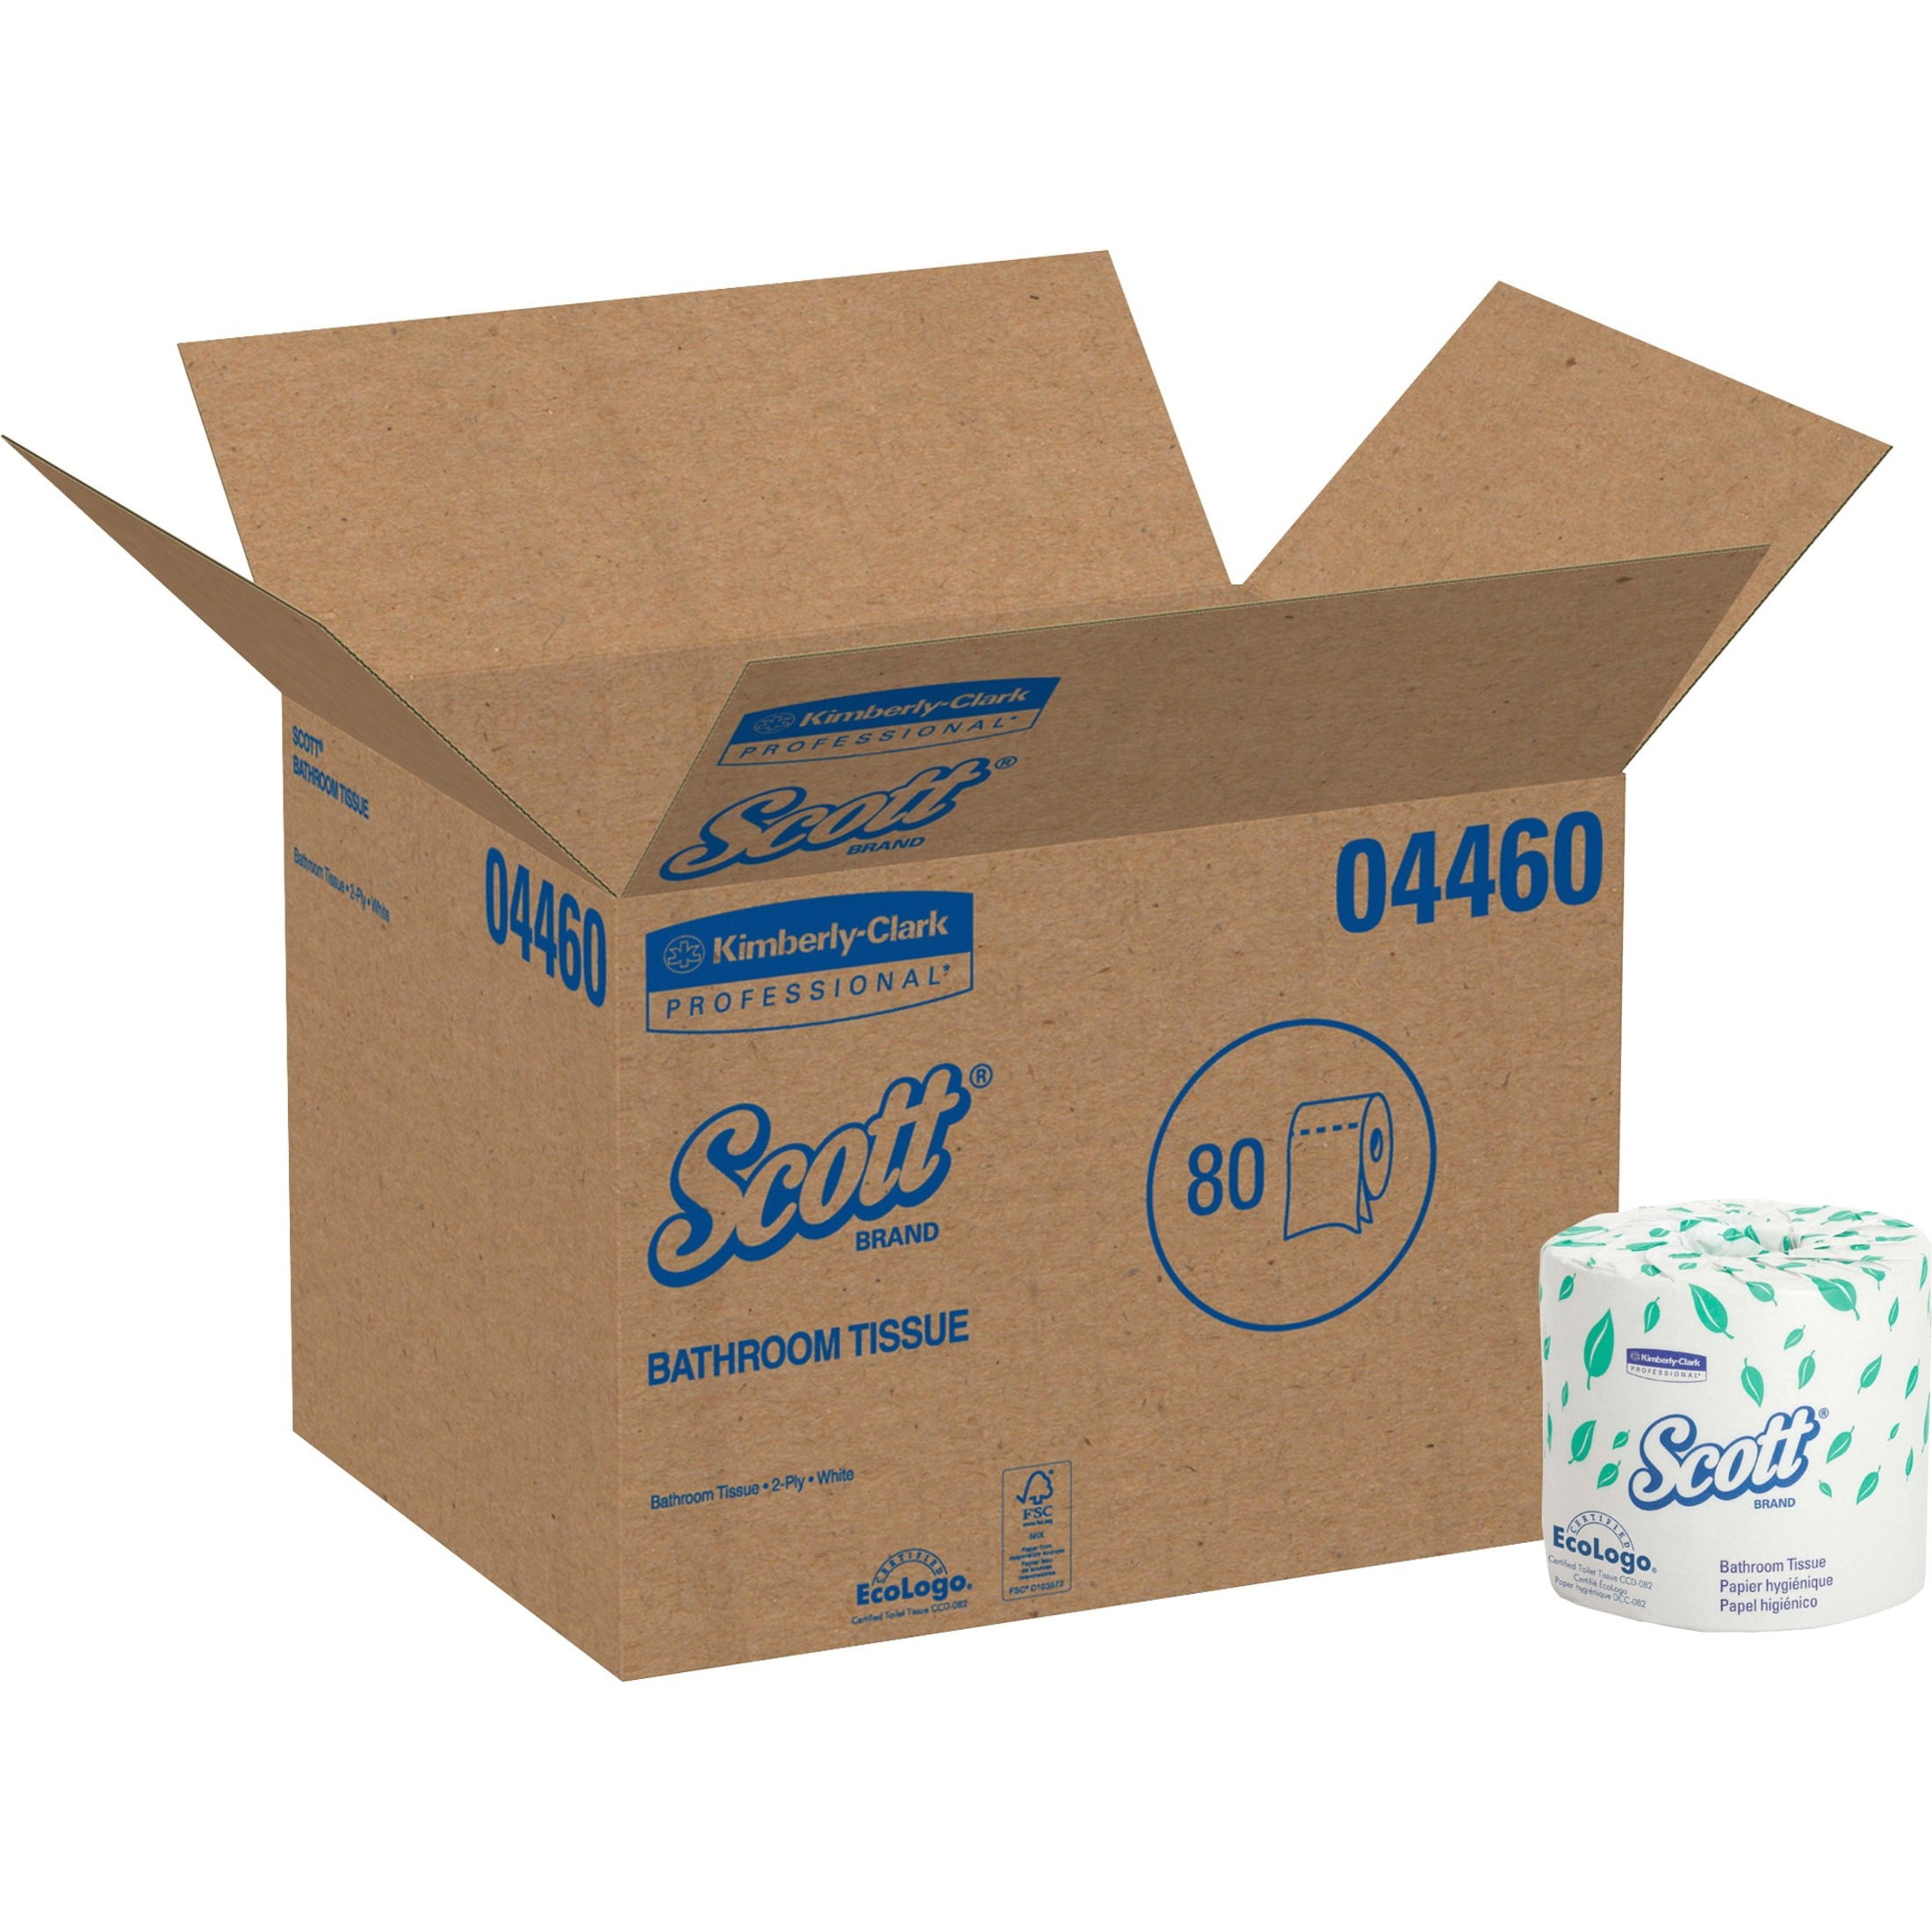 Details about   Scott Standard Roll Bathroom Tissue 2-Ply 550 Sheets/Roll 80/Carton 04460 